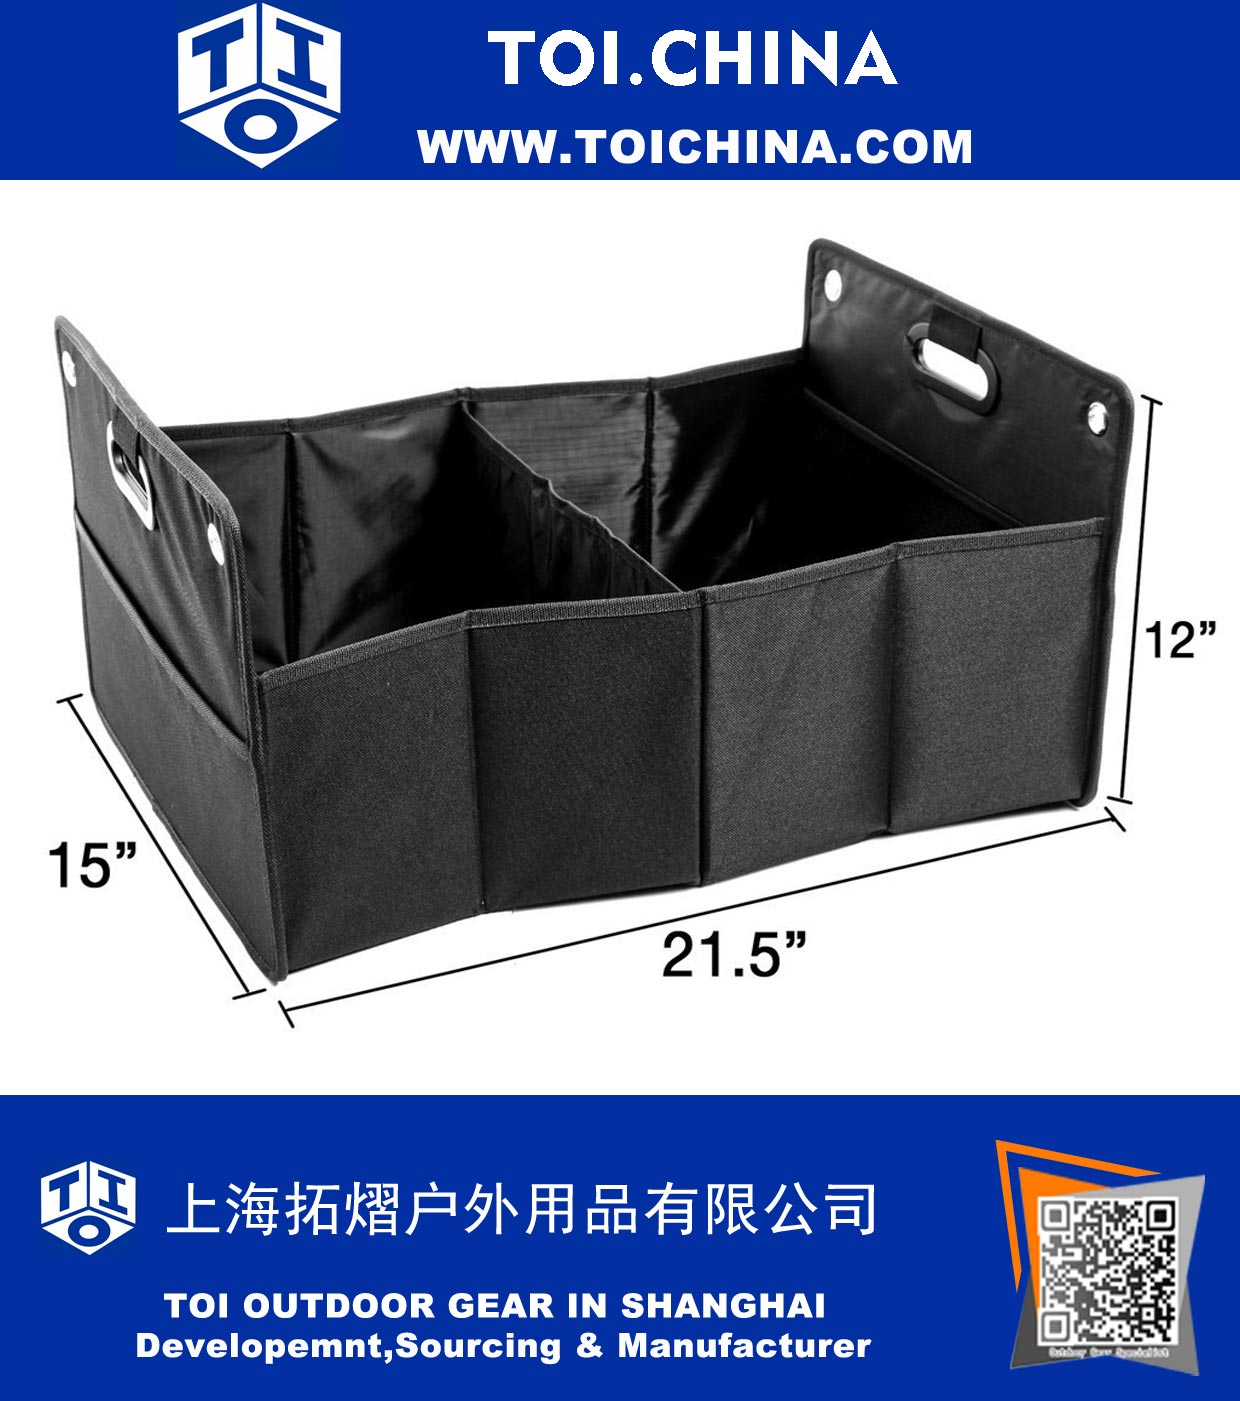 Car Fold Storage Container